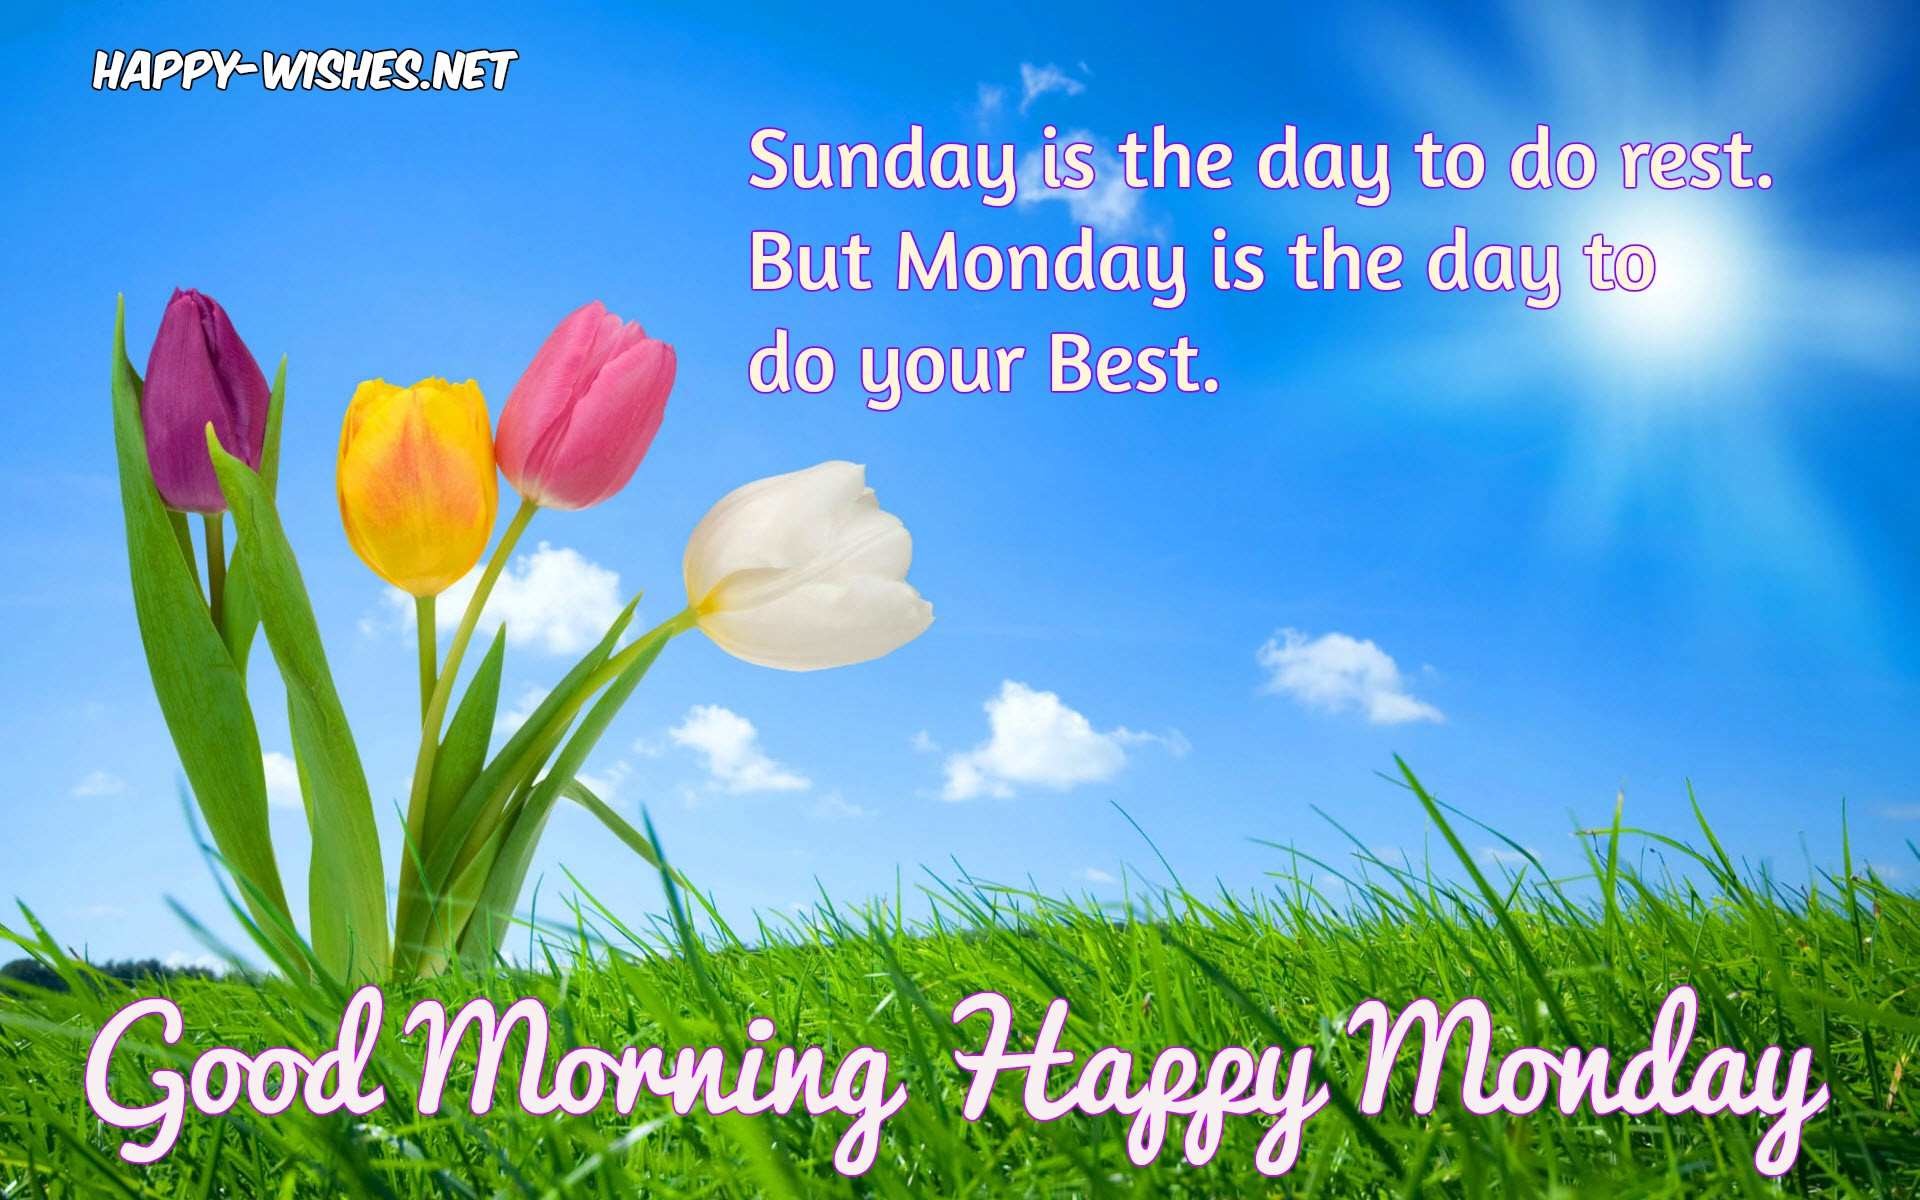 Good Morning Wishes On Monday Es - Monday Morning Wishes With Quotes , HD Wallpaper & Backgrounds